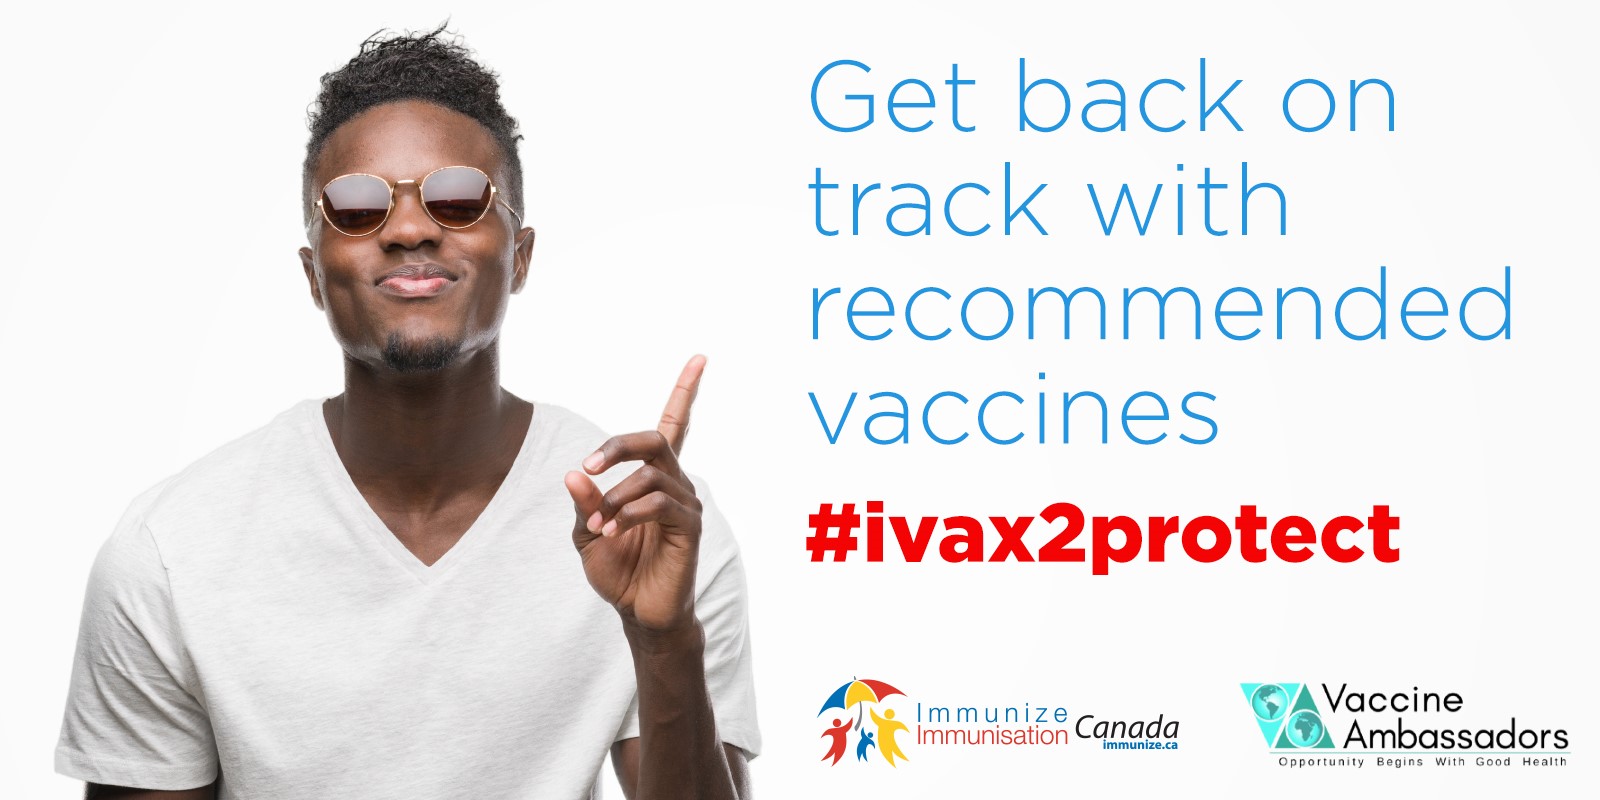 Young adults: Get back on track with recommended vaccinations. 